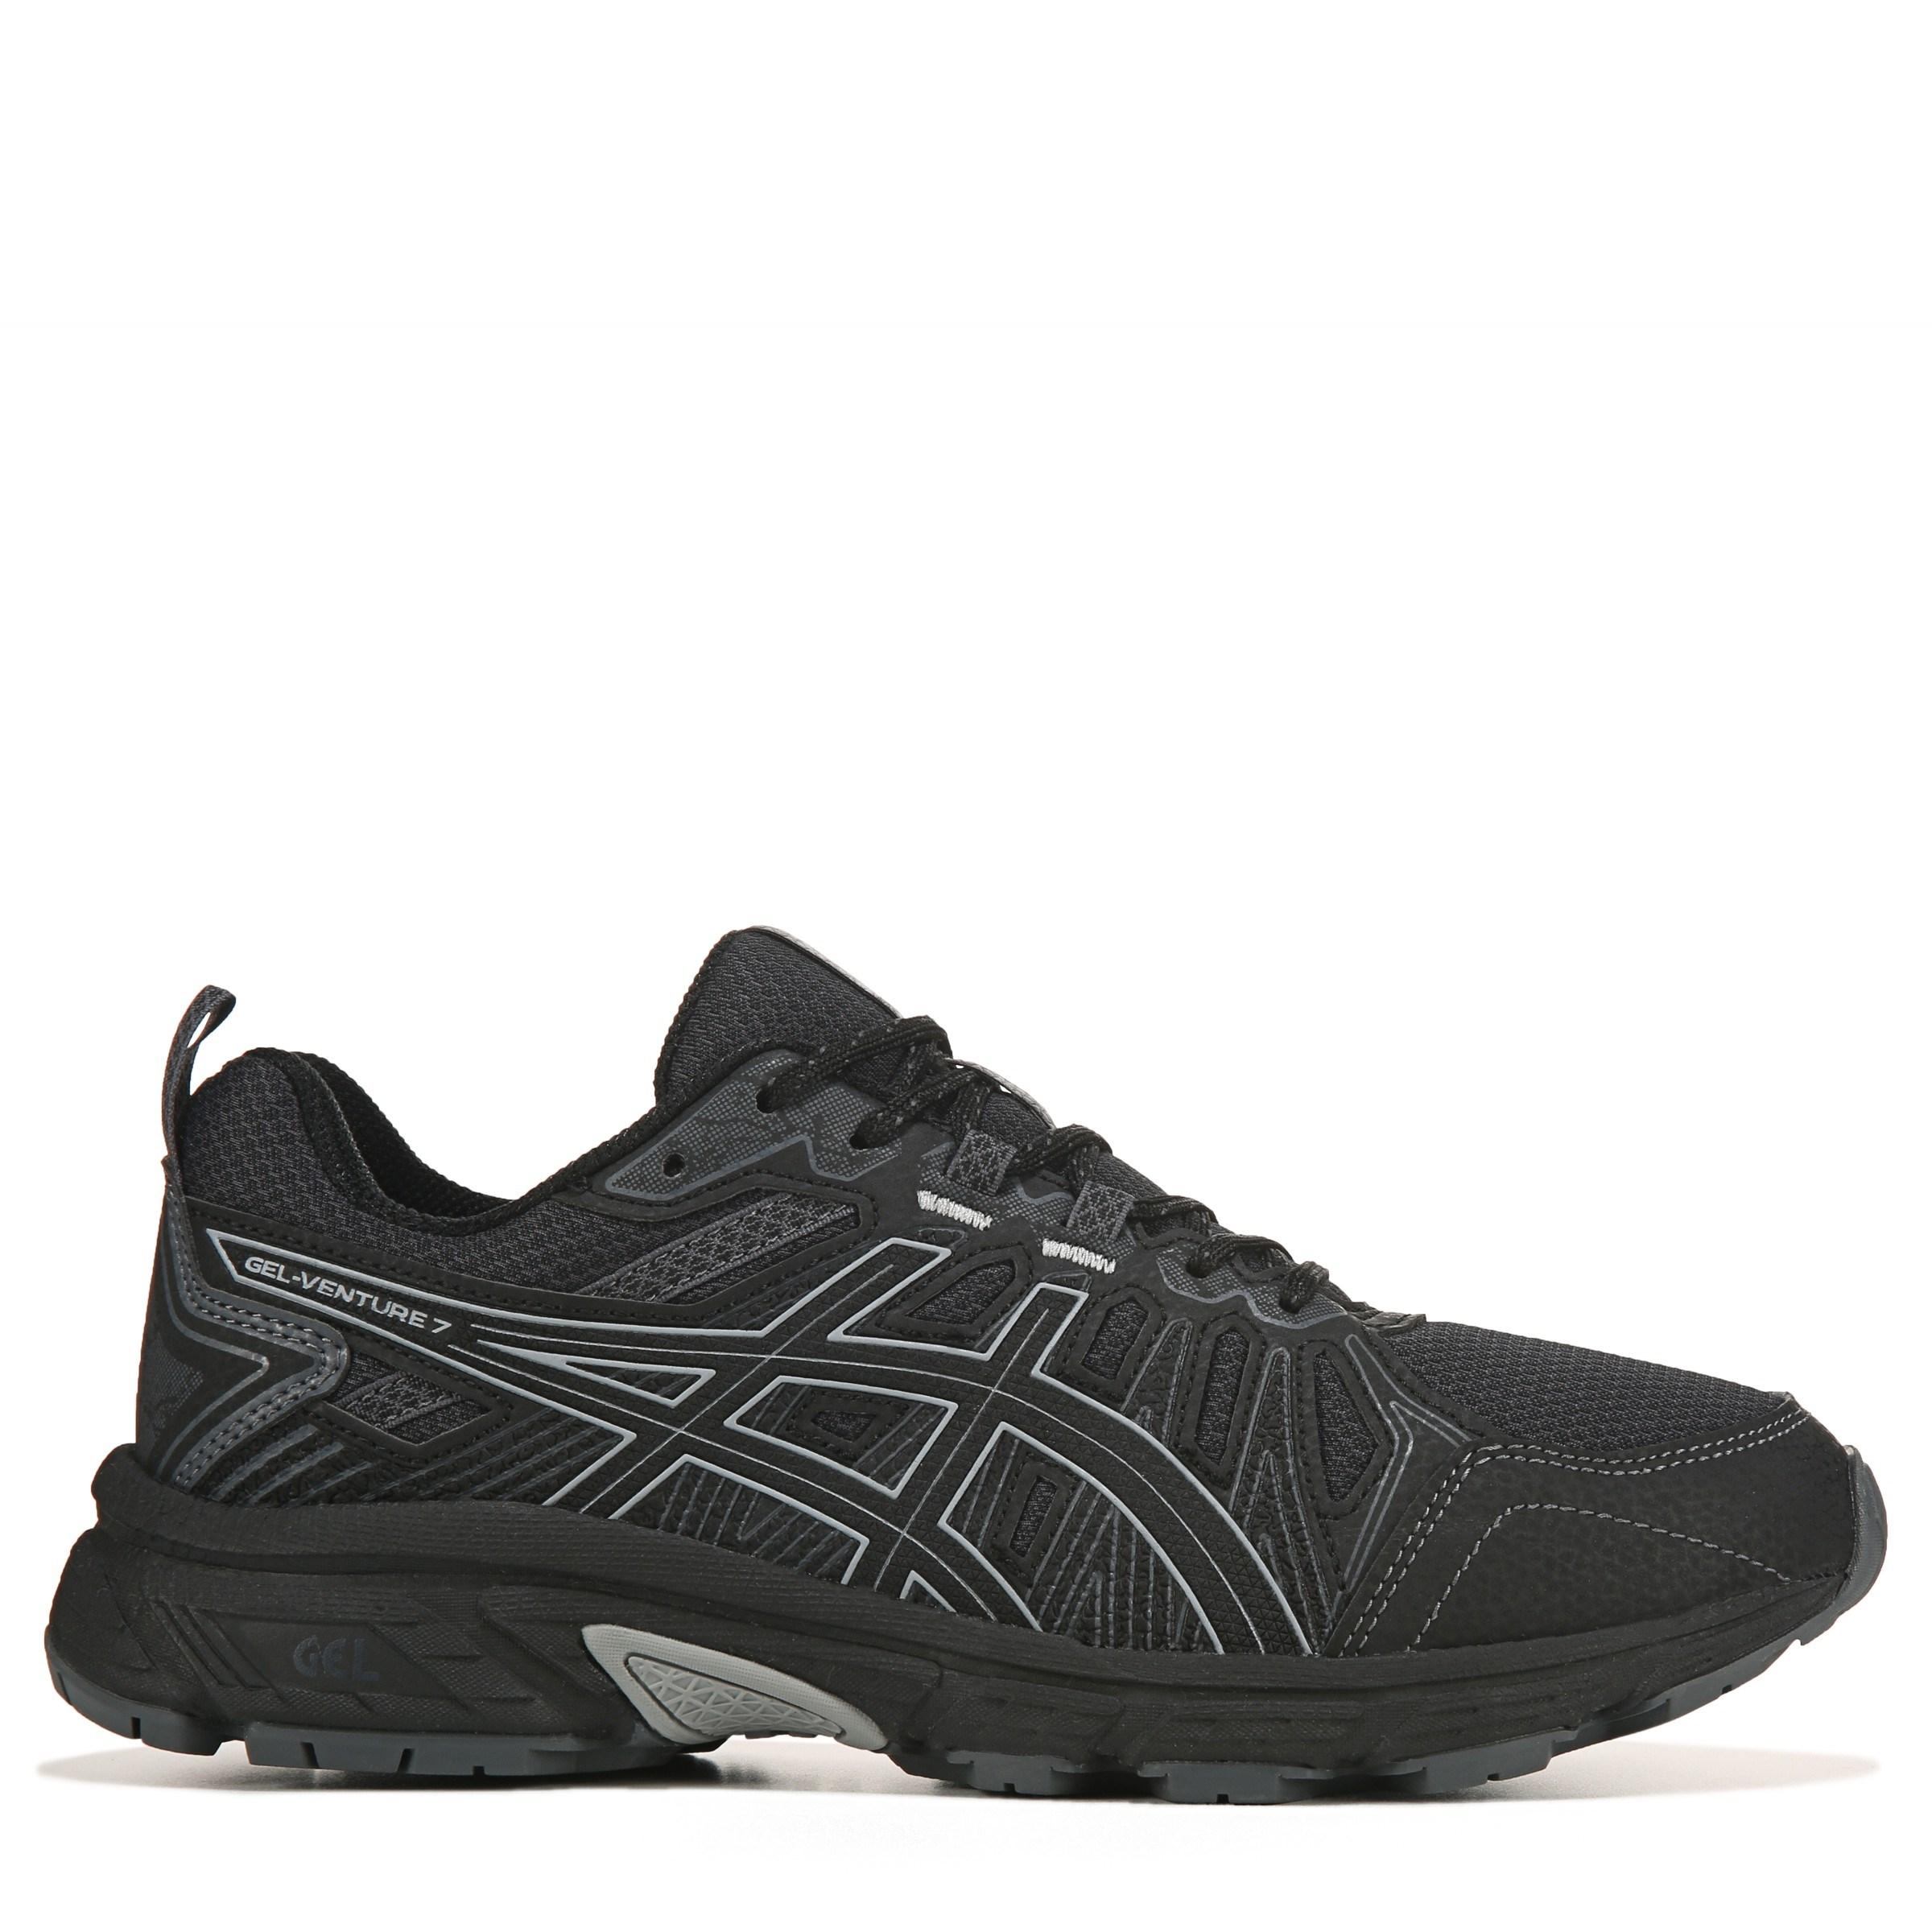 Asics Synthetic Gel Venture 7 Medium/wide Trail Running Shoes in Black ...